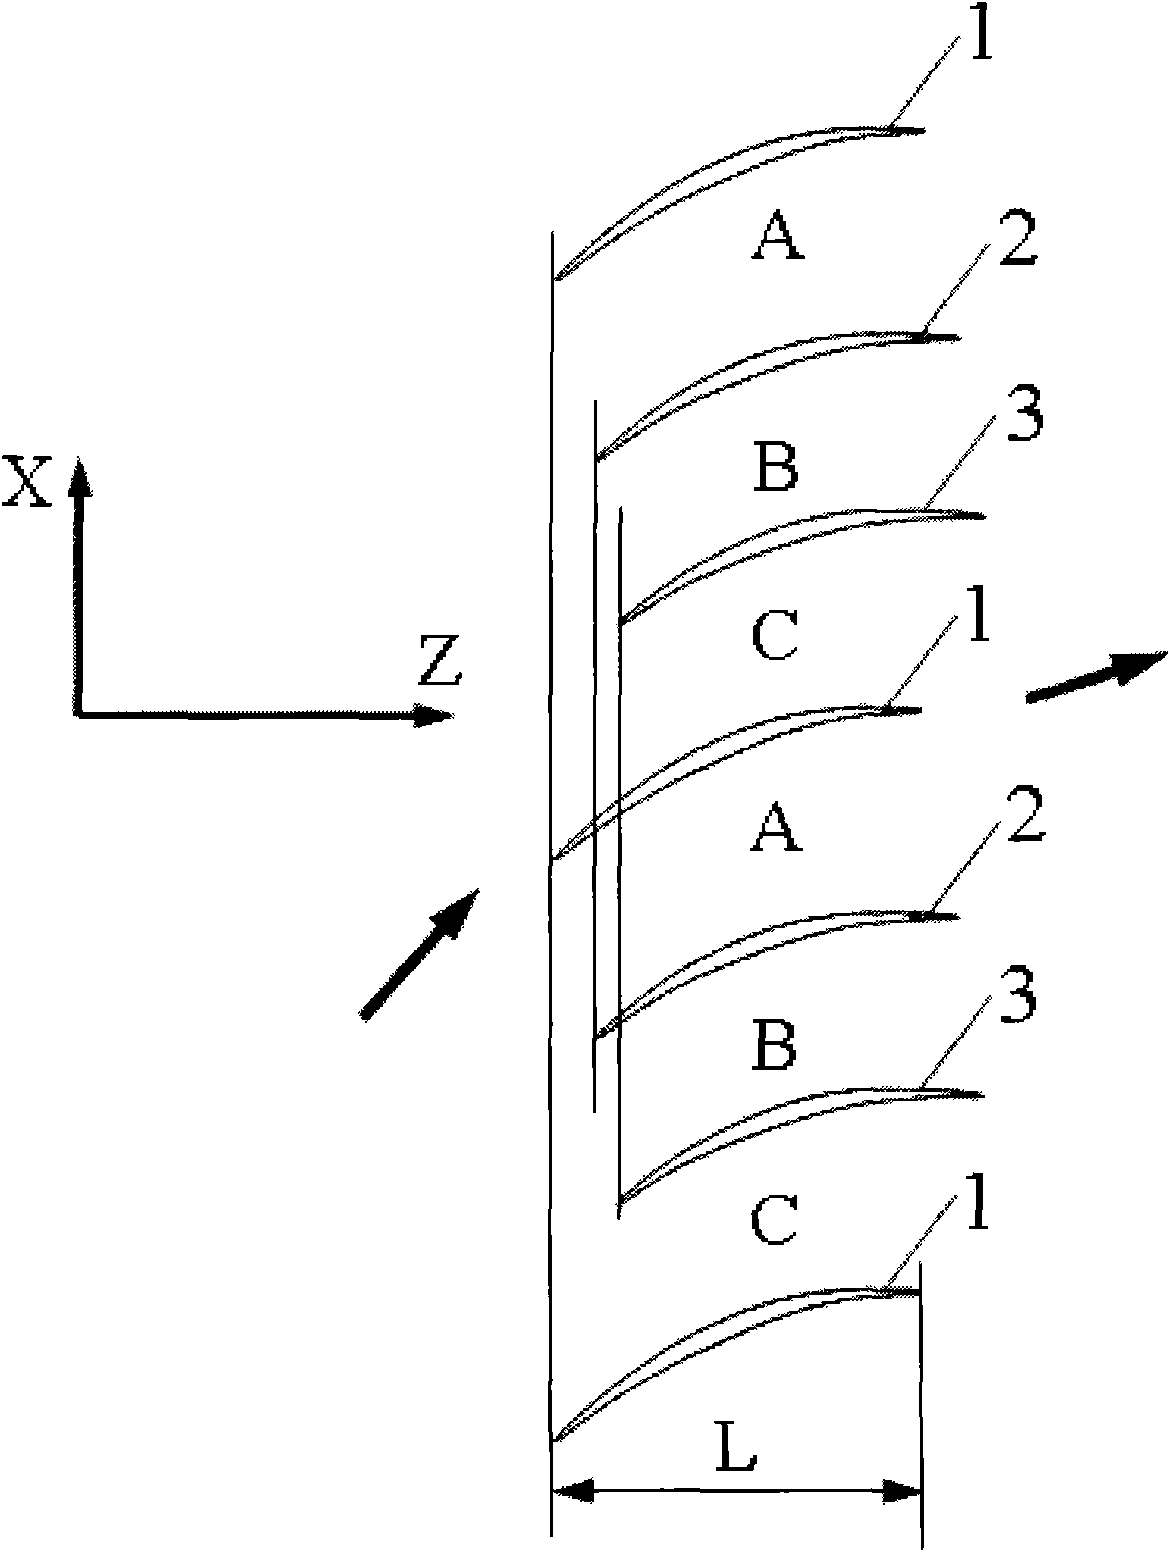 Blade arrangement mode of compressor blade row for enhancing air load and stability